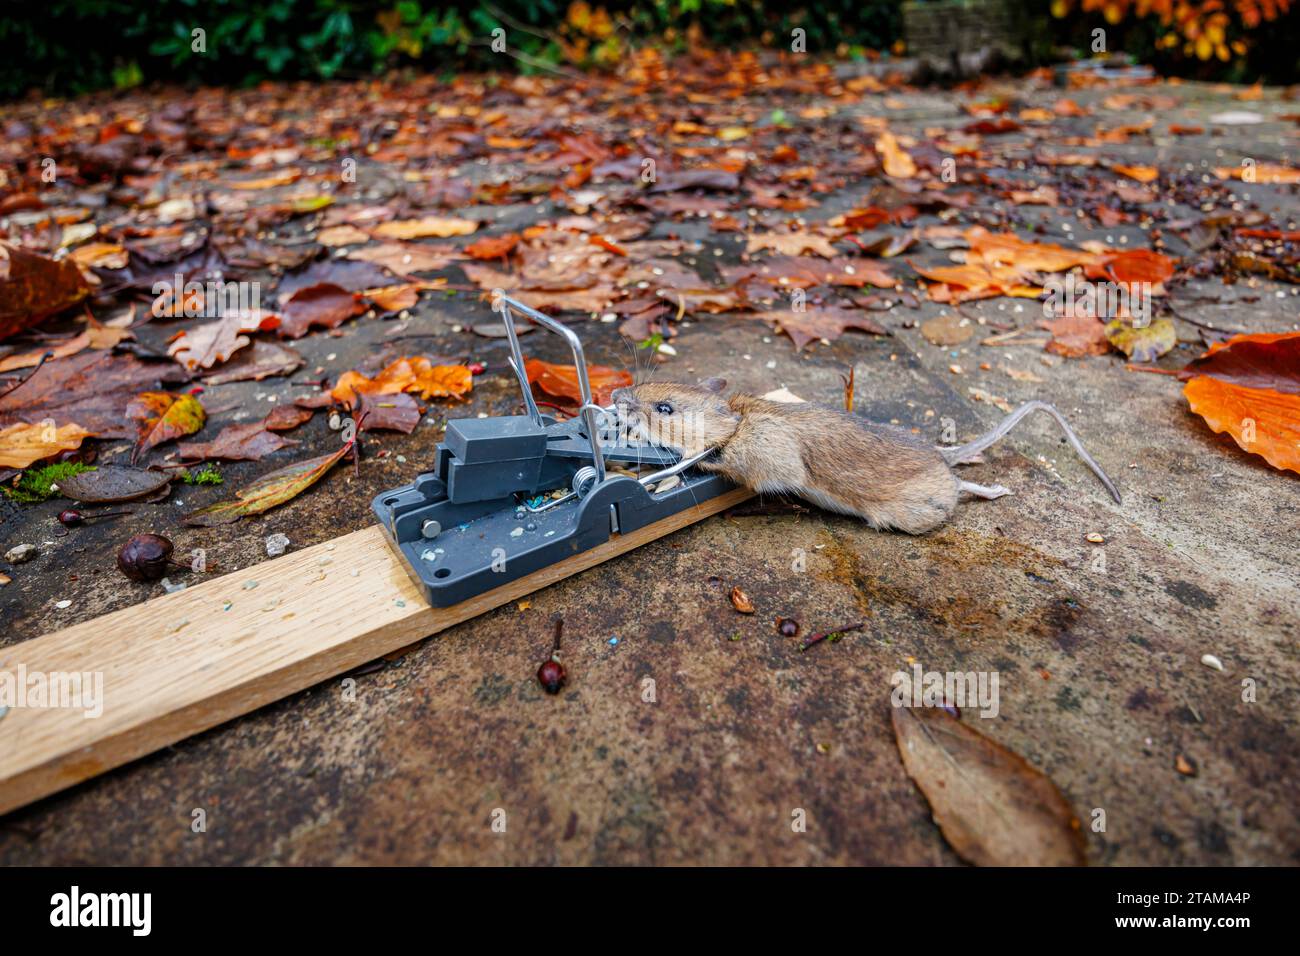 humane mouse trap - woman opening mouse trap outside in grass Stock Photo -  Alamy